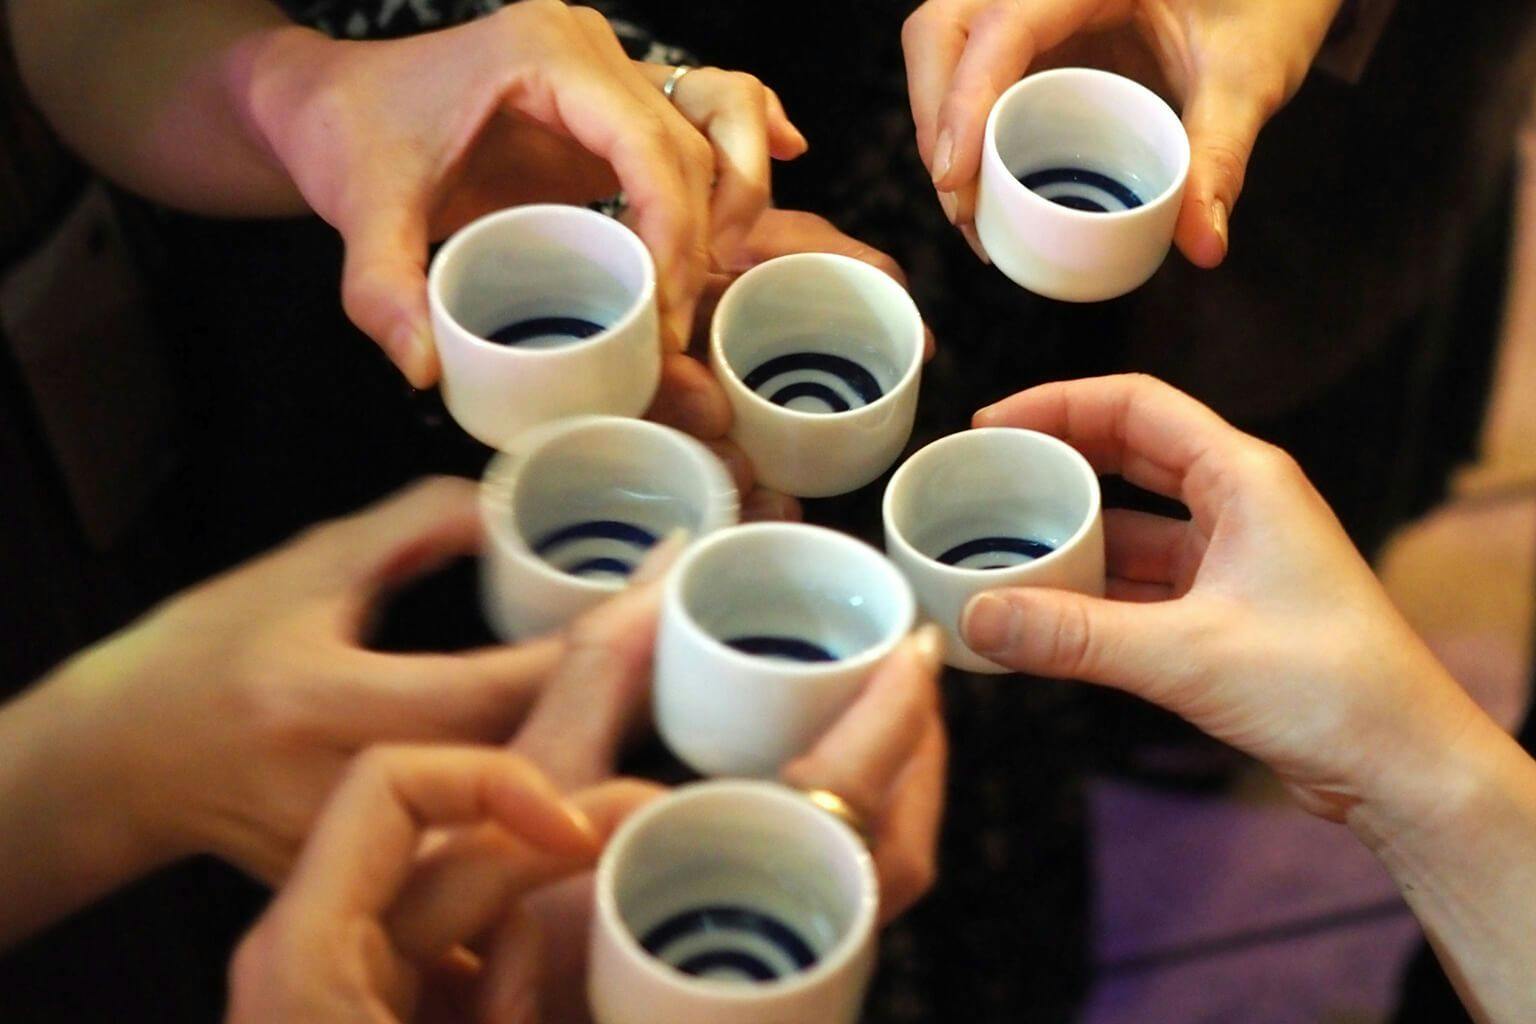 Be sure to kampai (cheers) with your friends.